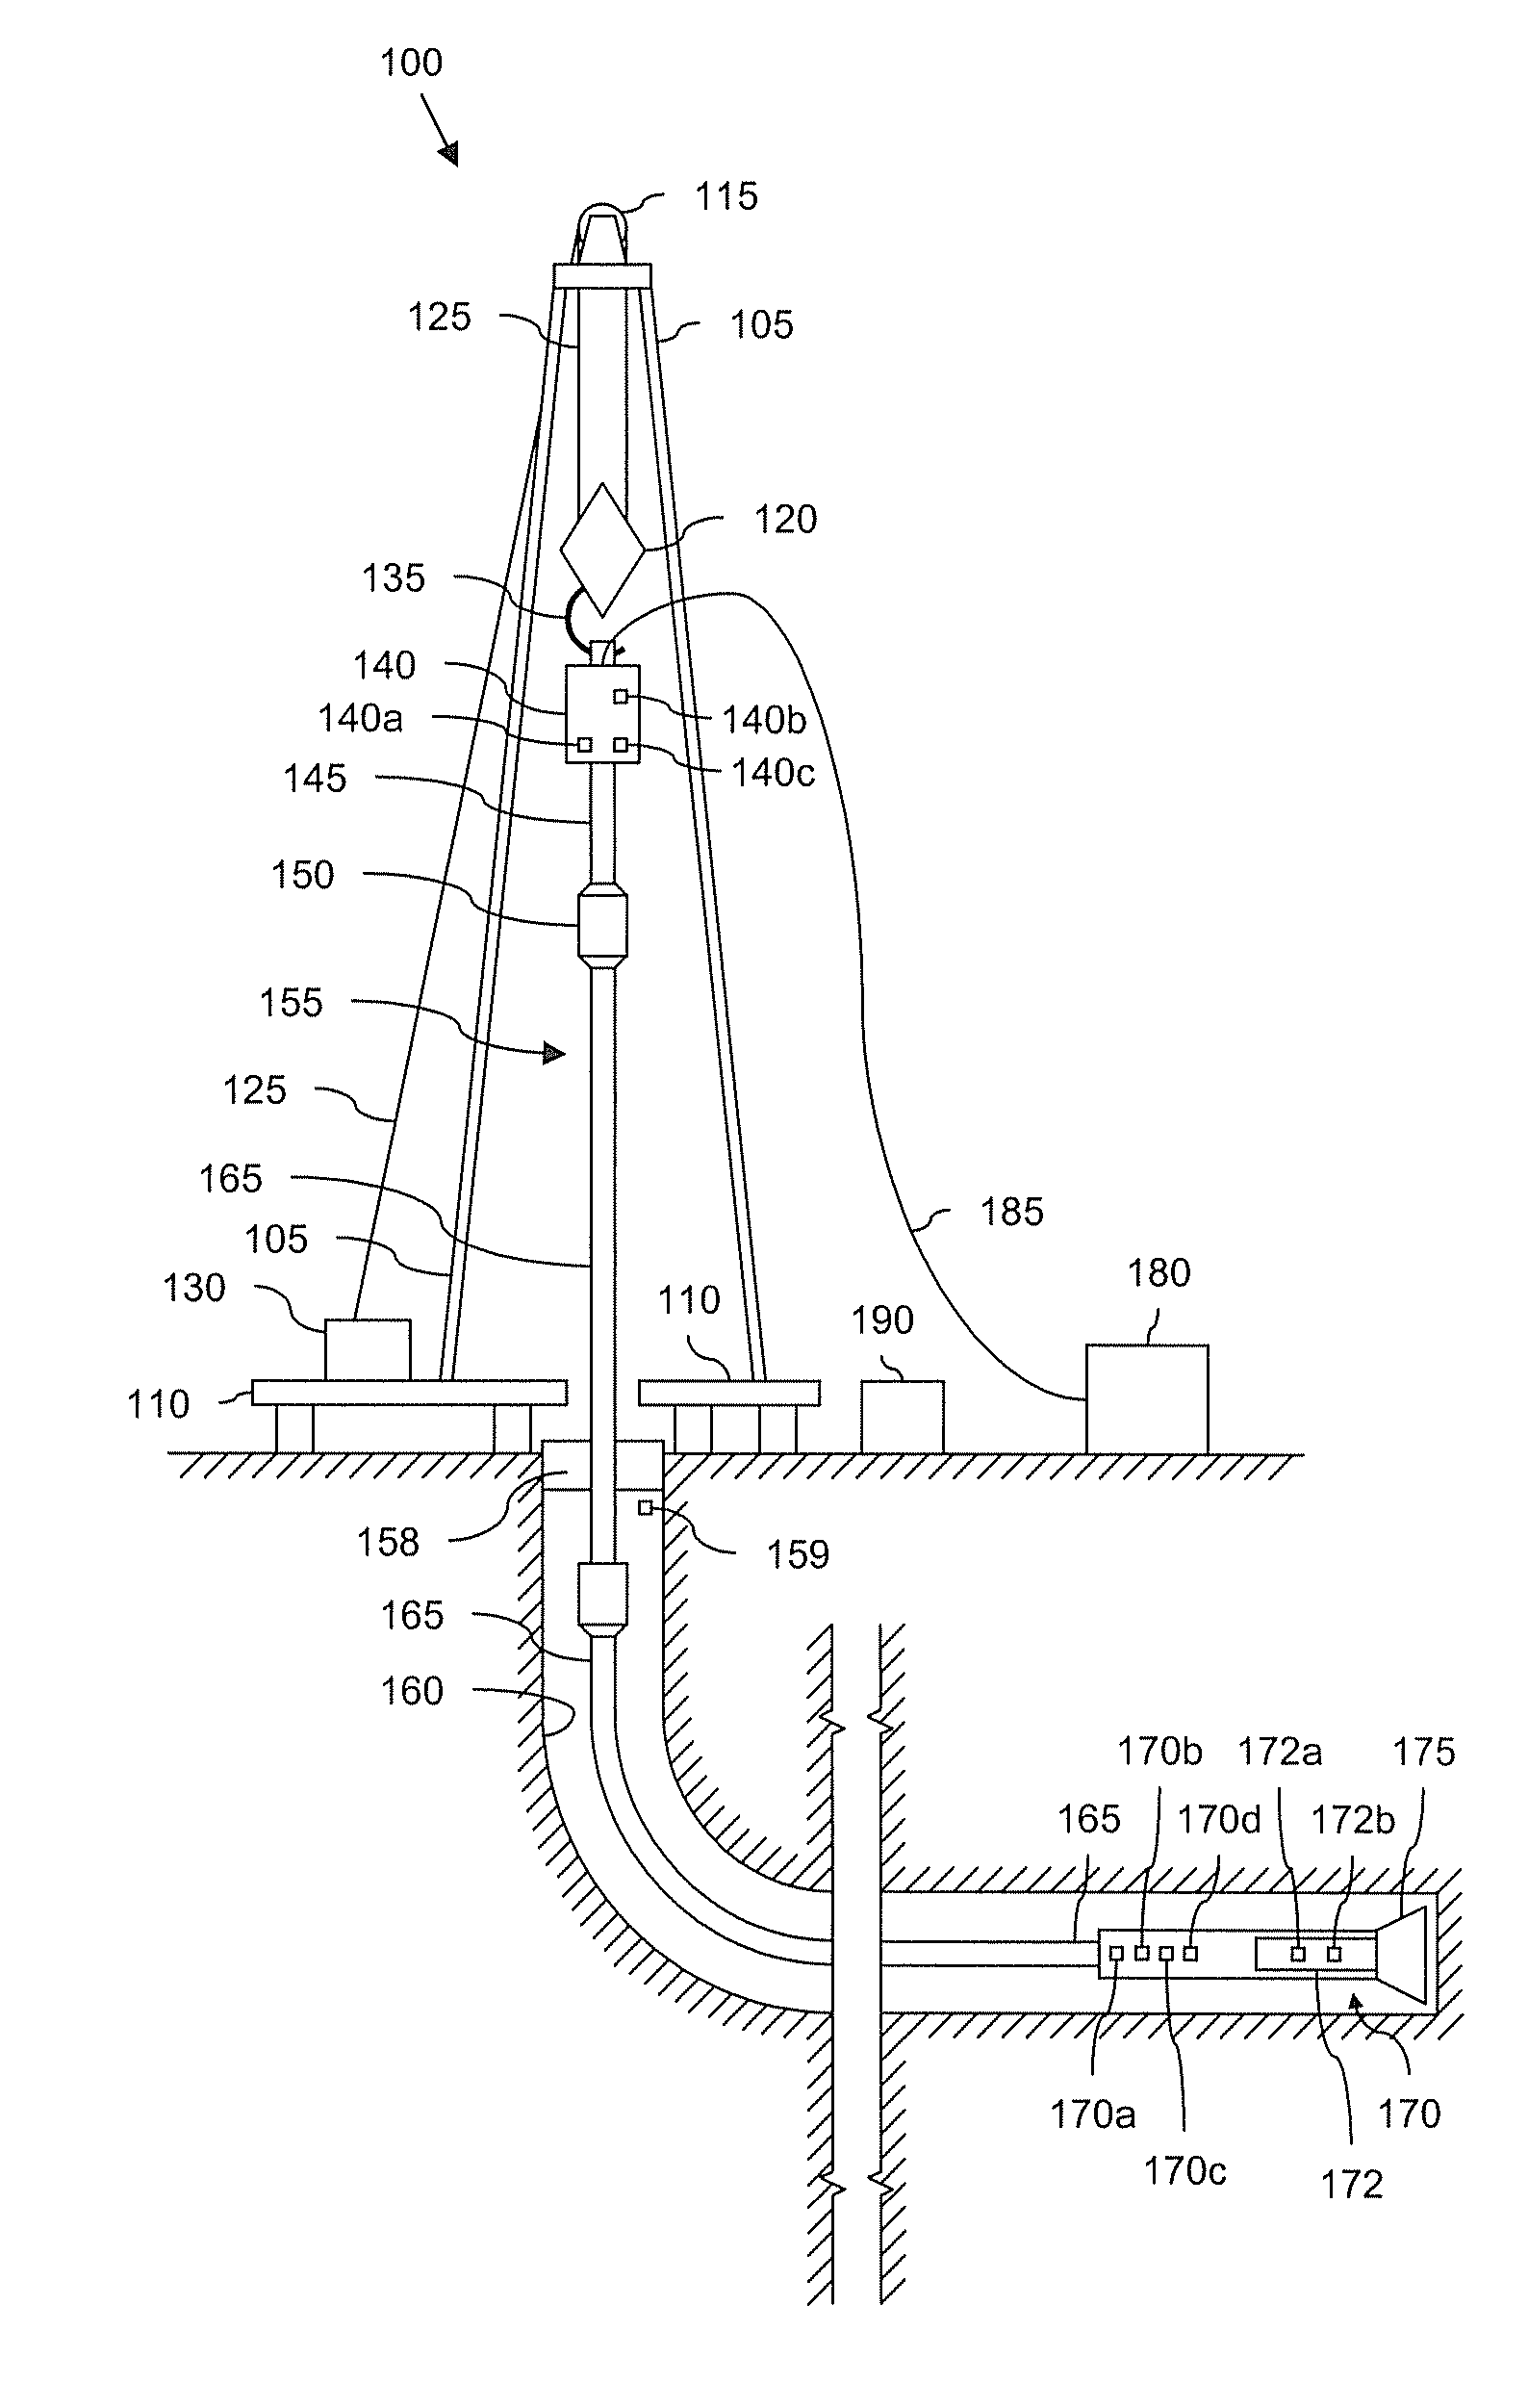 Automated directional drilling apparatus and methods